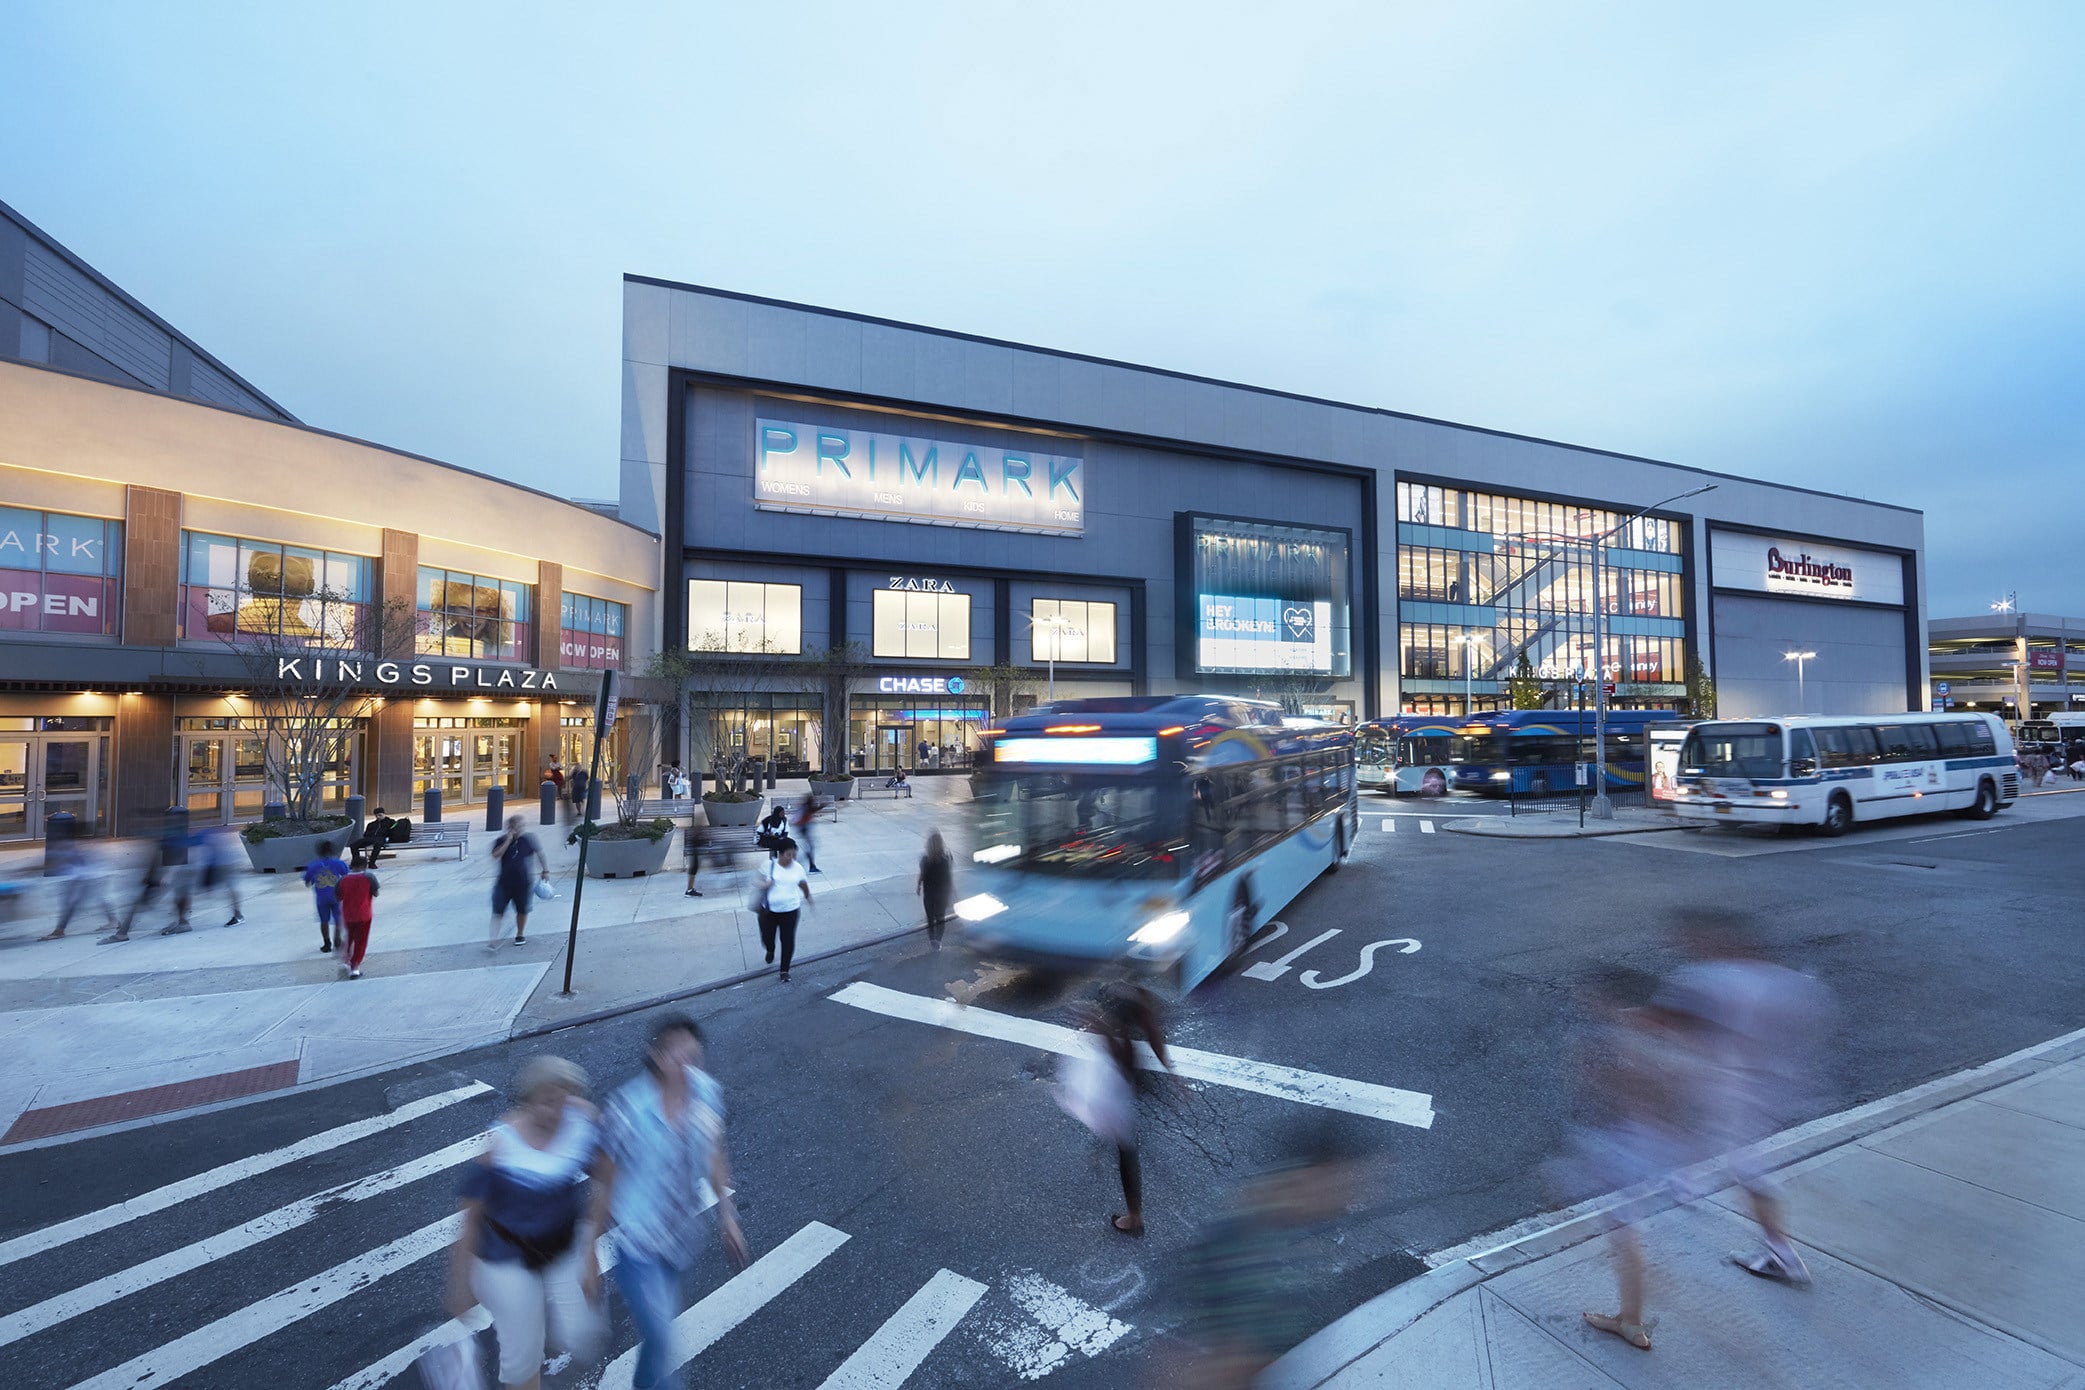 Macerich Announces Two New Primark Stores